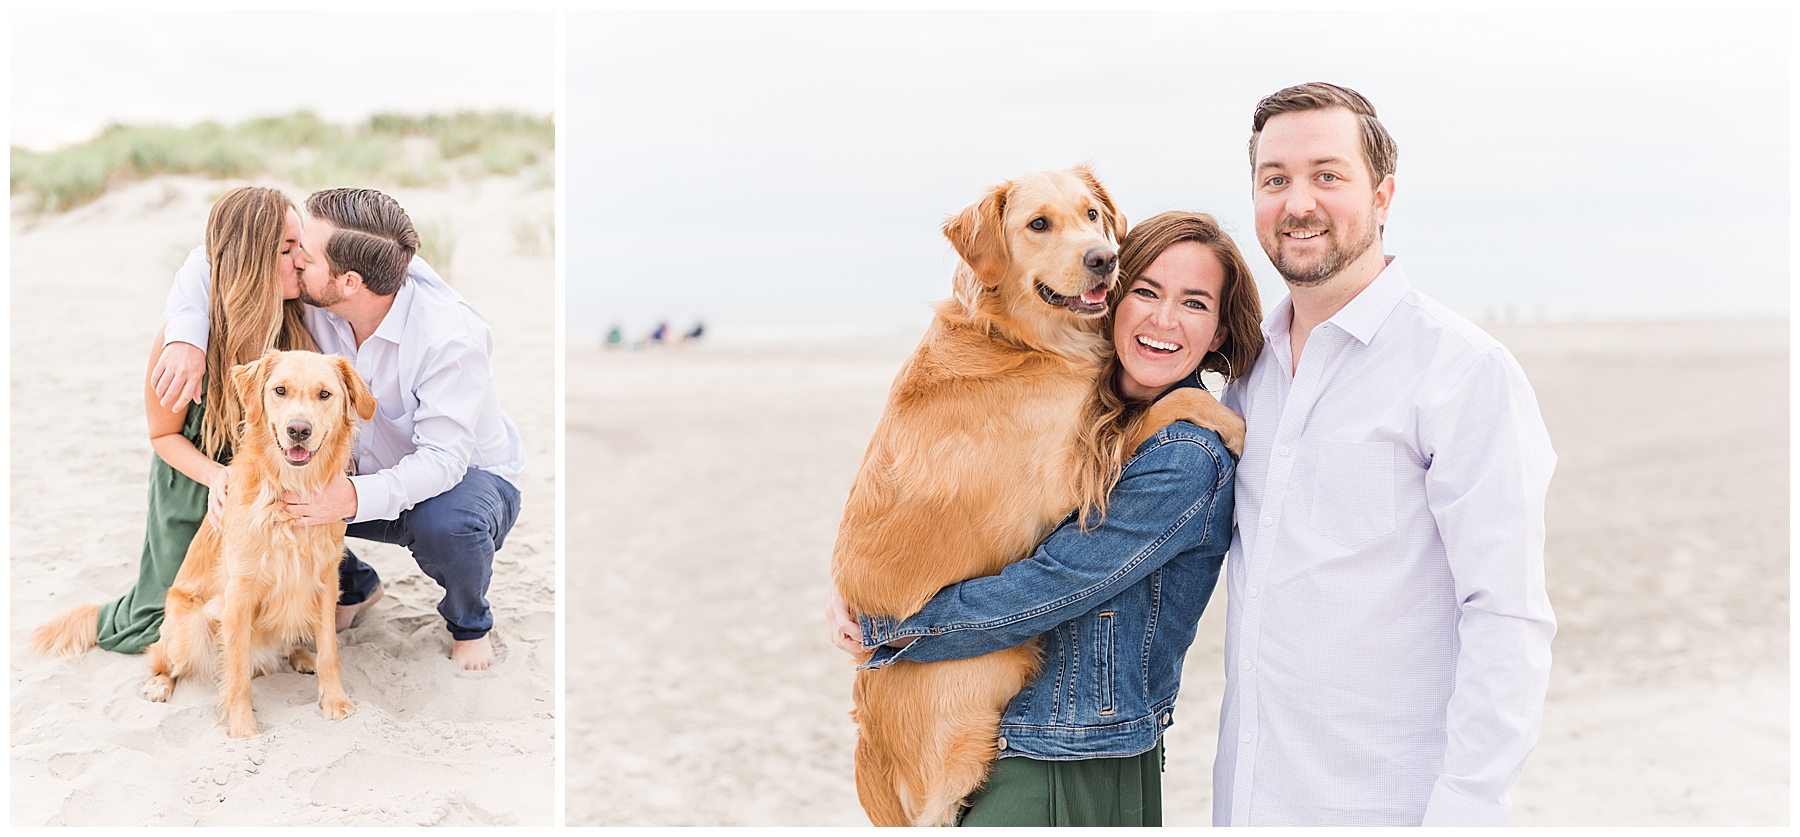 Engagement Session at The Shore with Dog